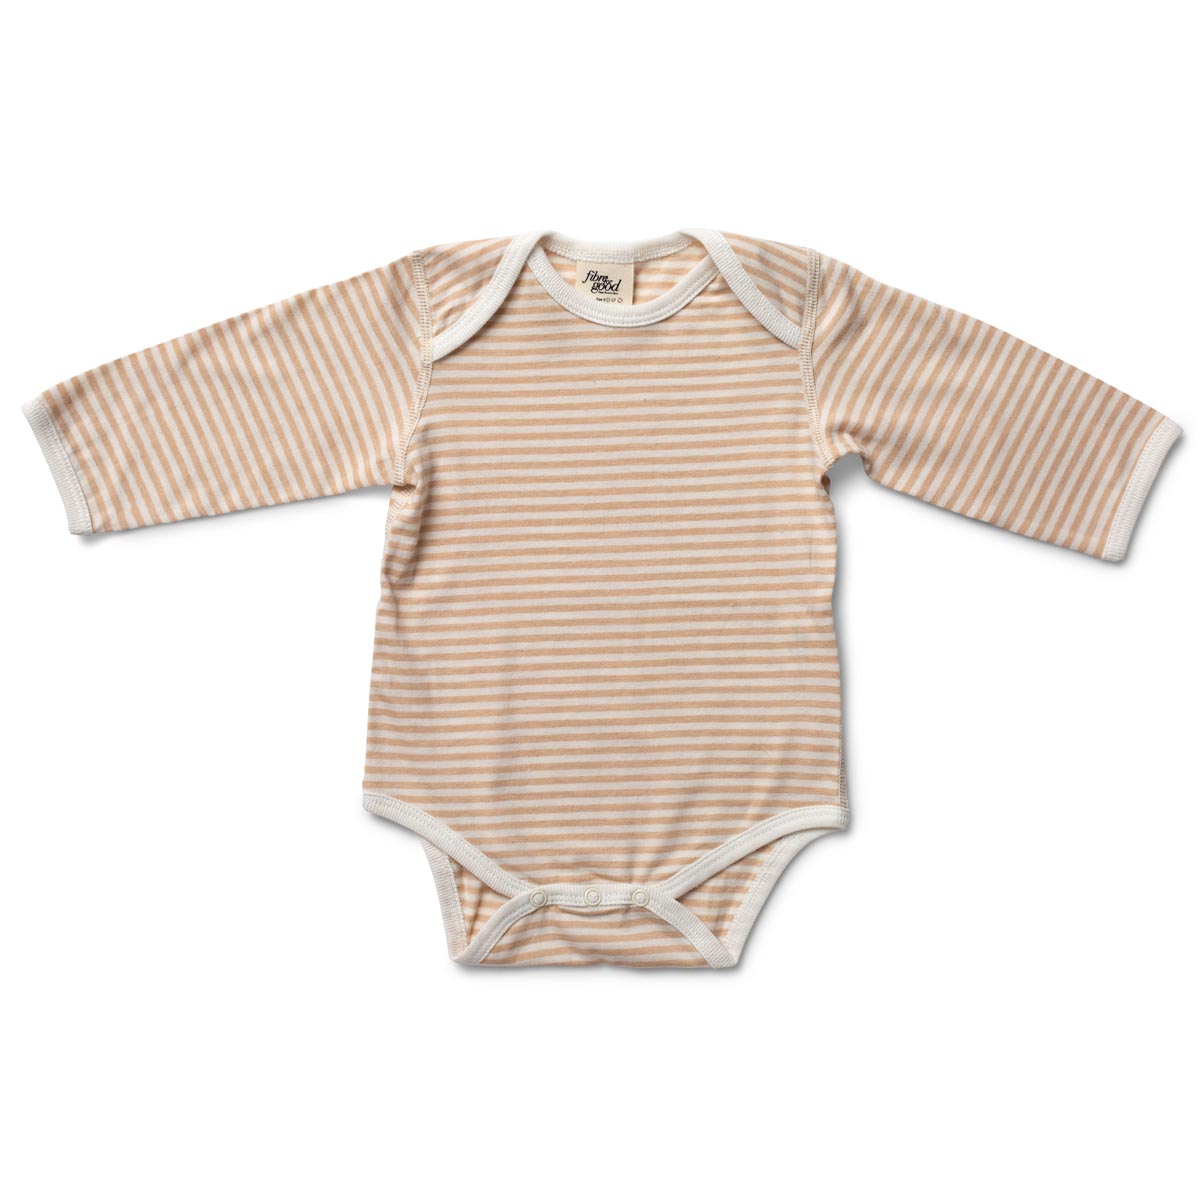 Baby Long Sleeve Body Suit, Brown Nat Stripes